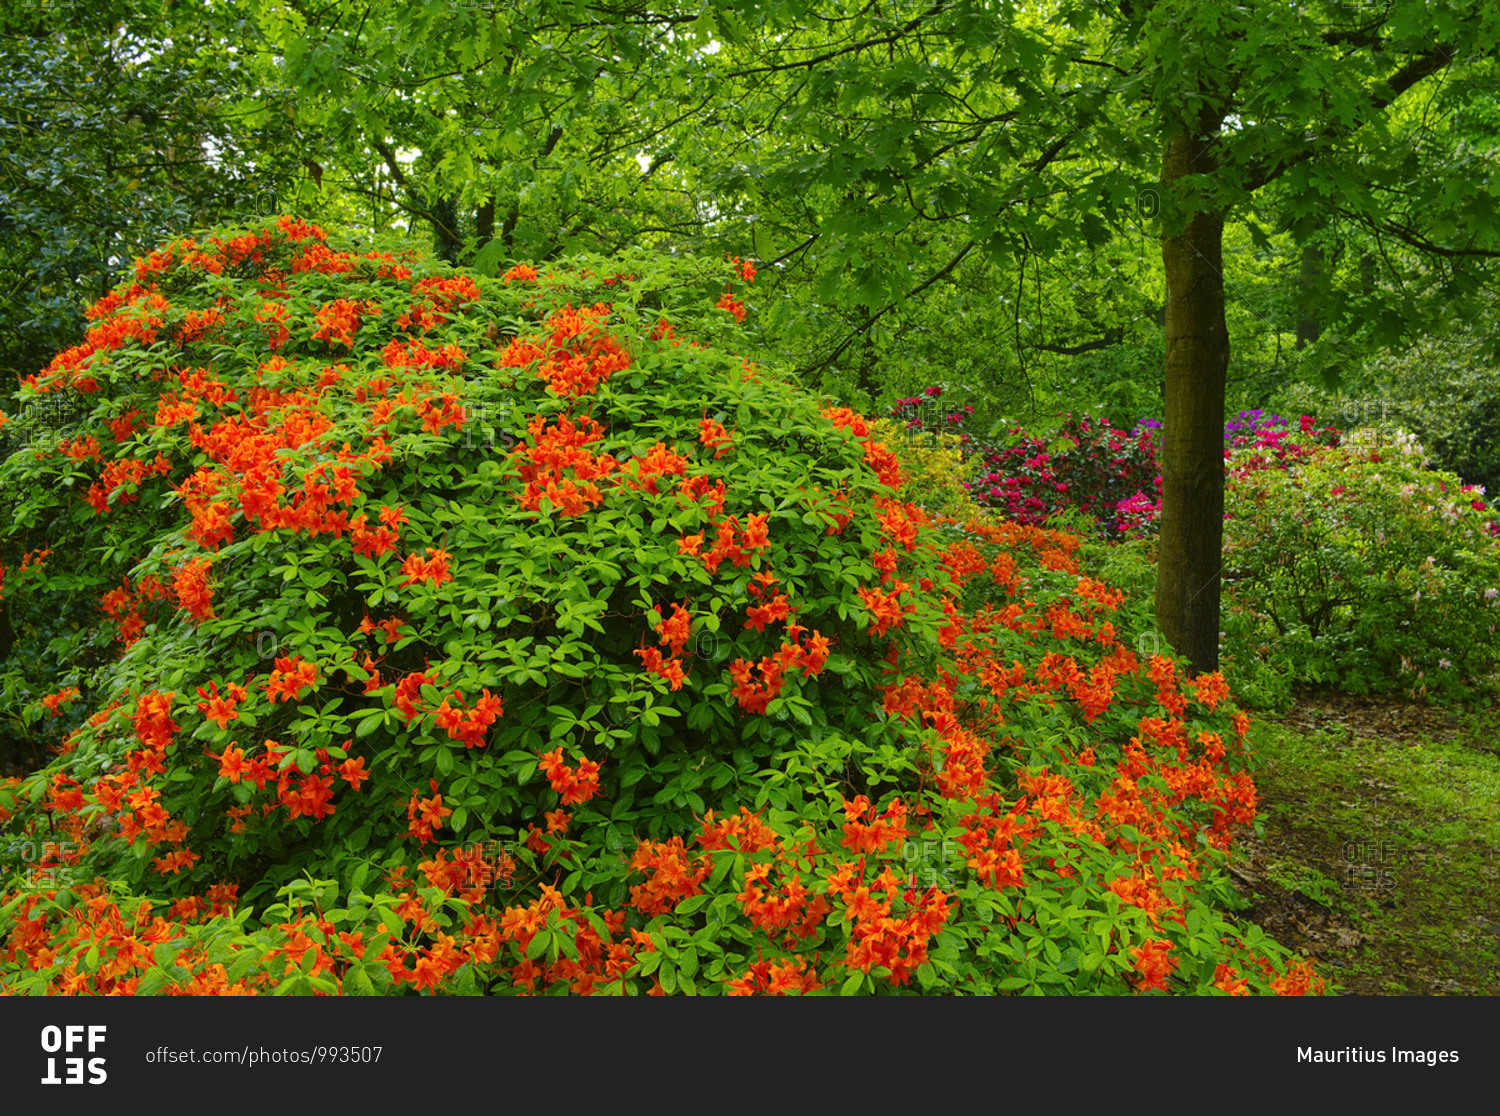 Europe, Germany, Hesse, Marburg, blooming rhododendrons in the rhododendron forest